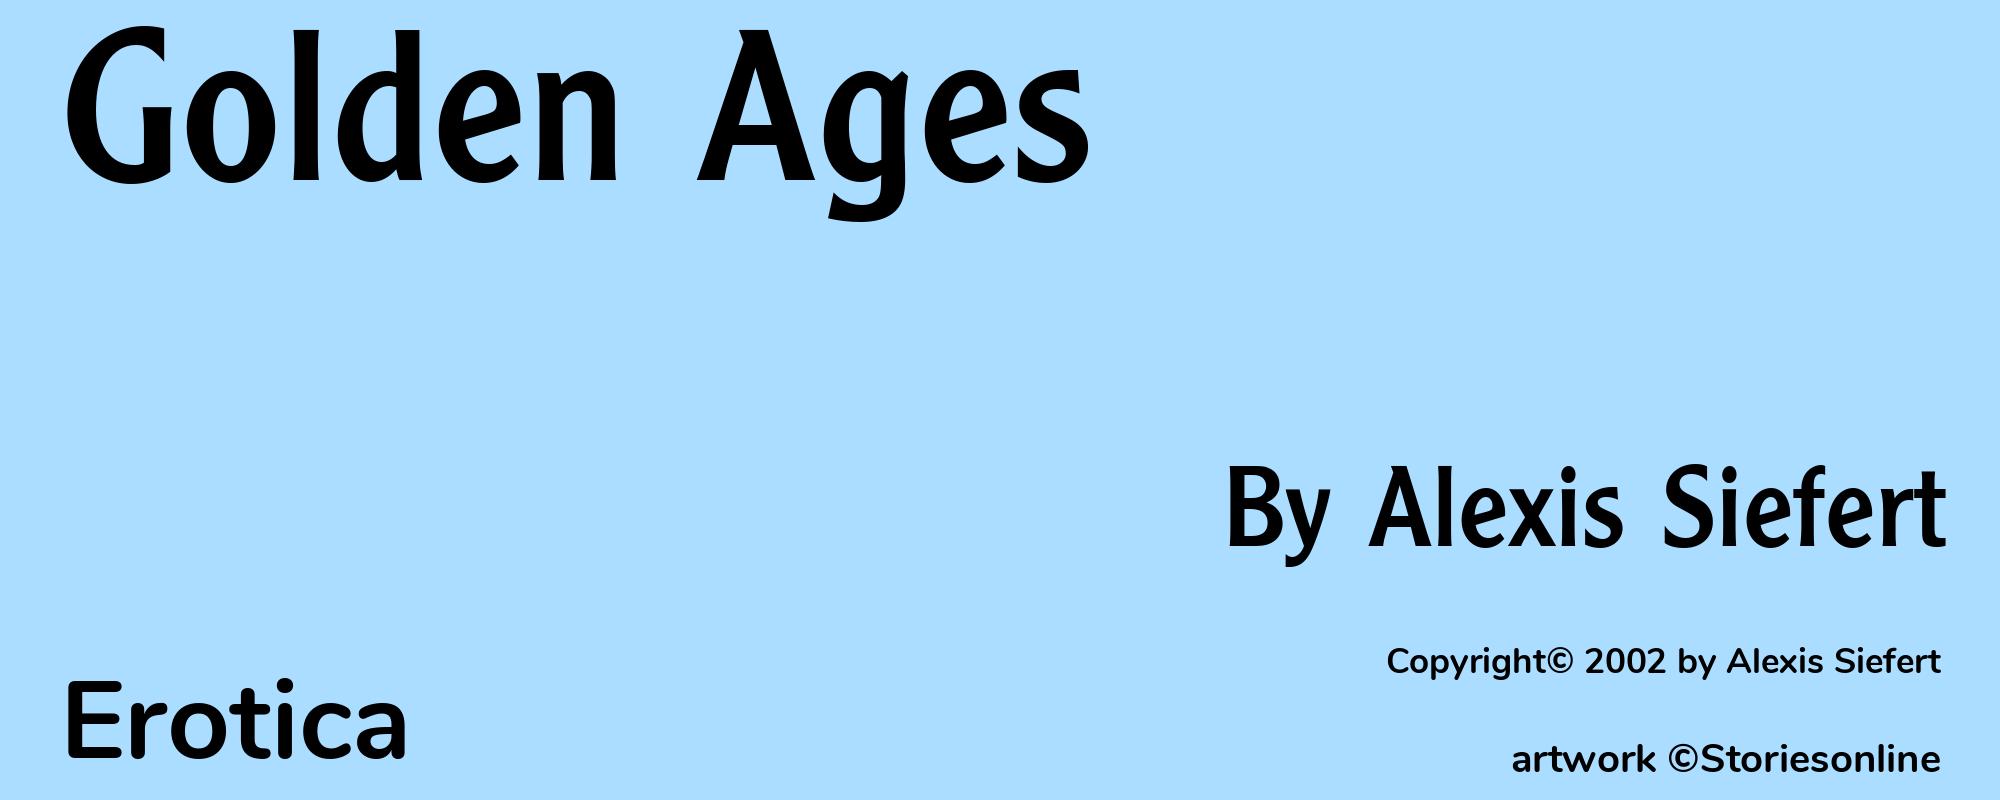 Golden Ages - Cover